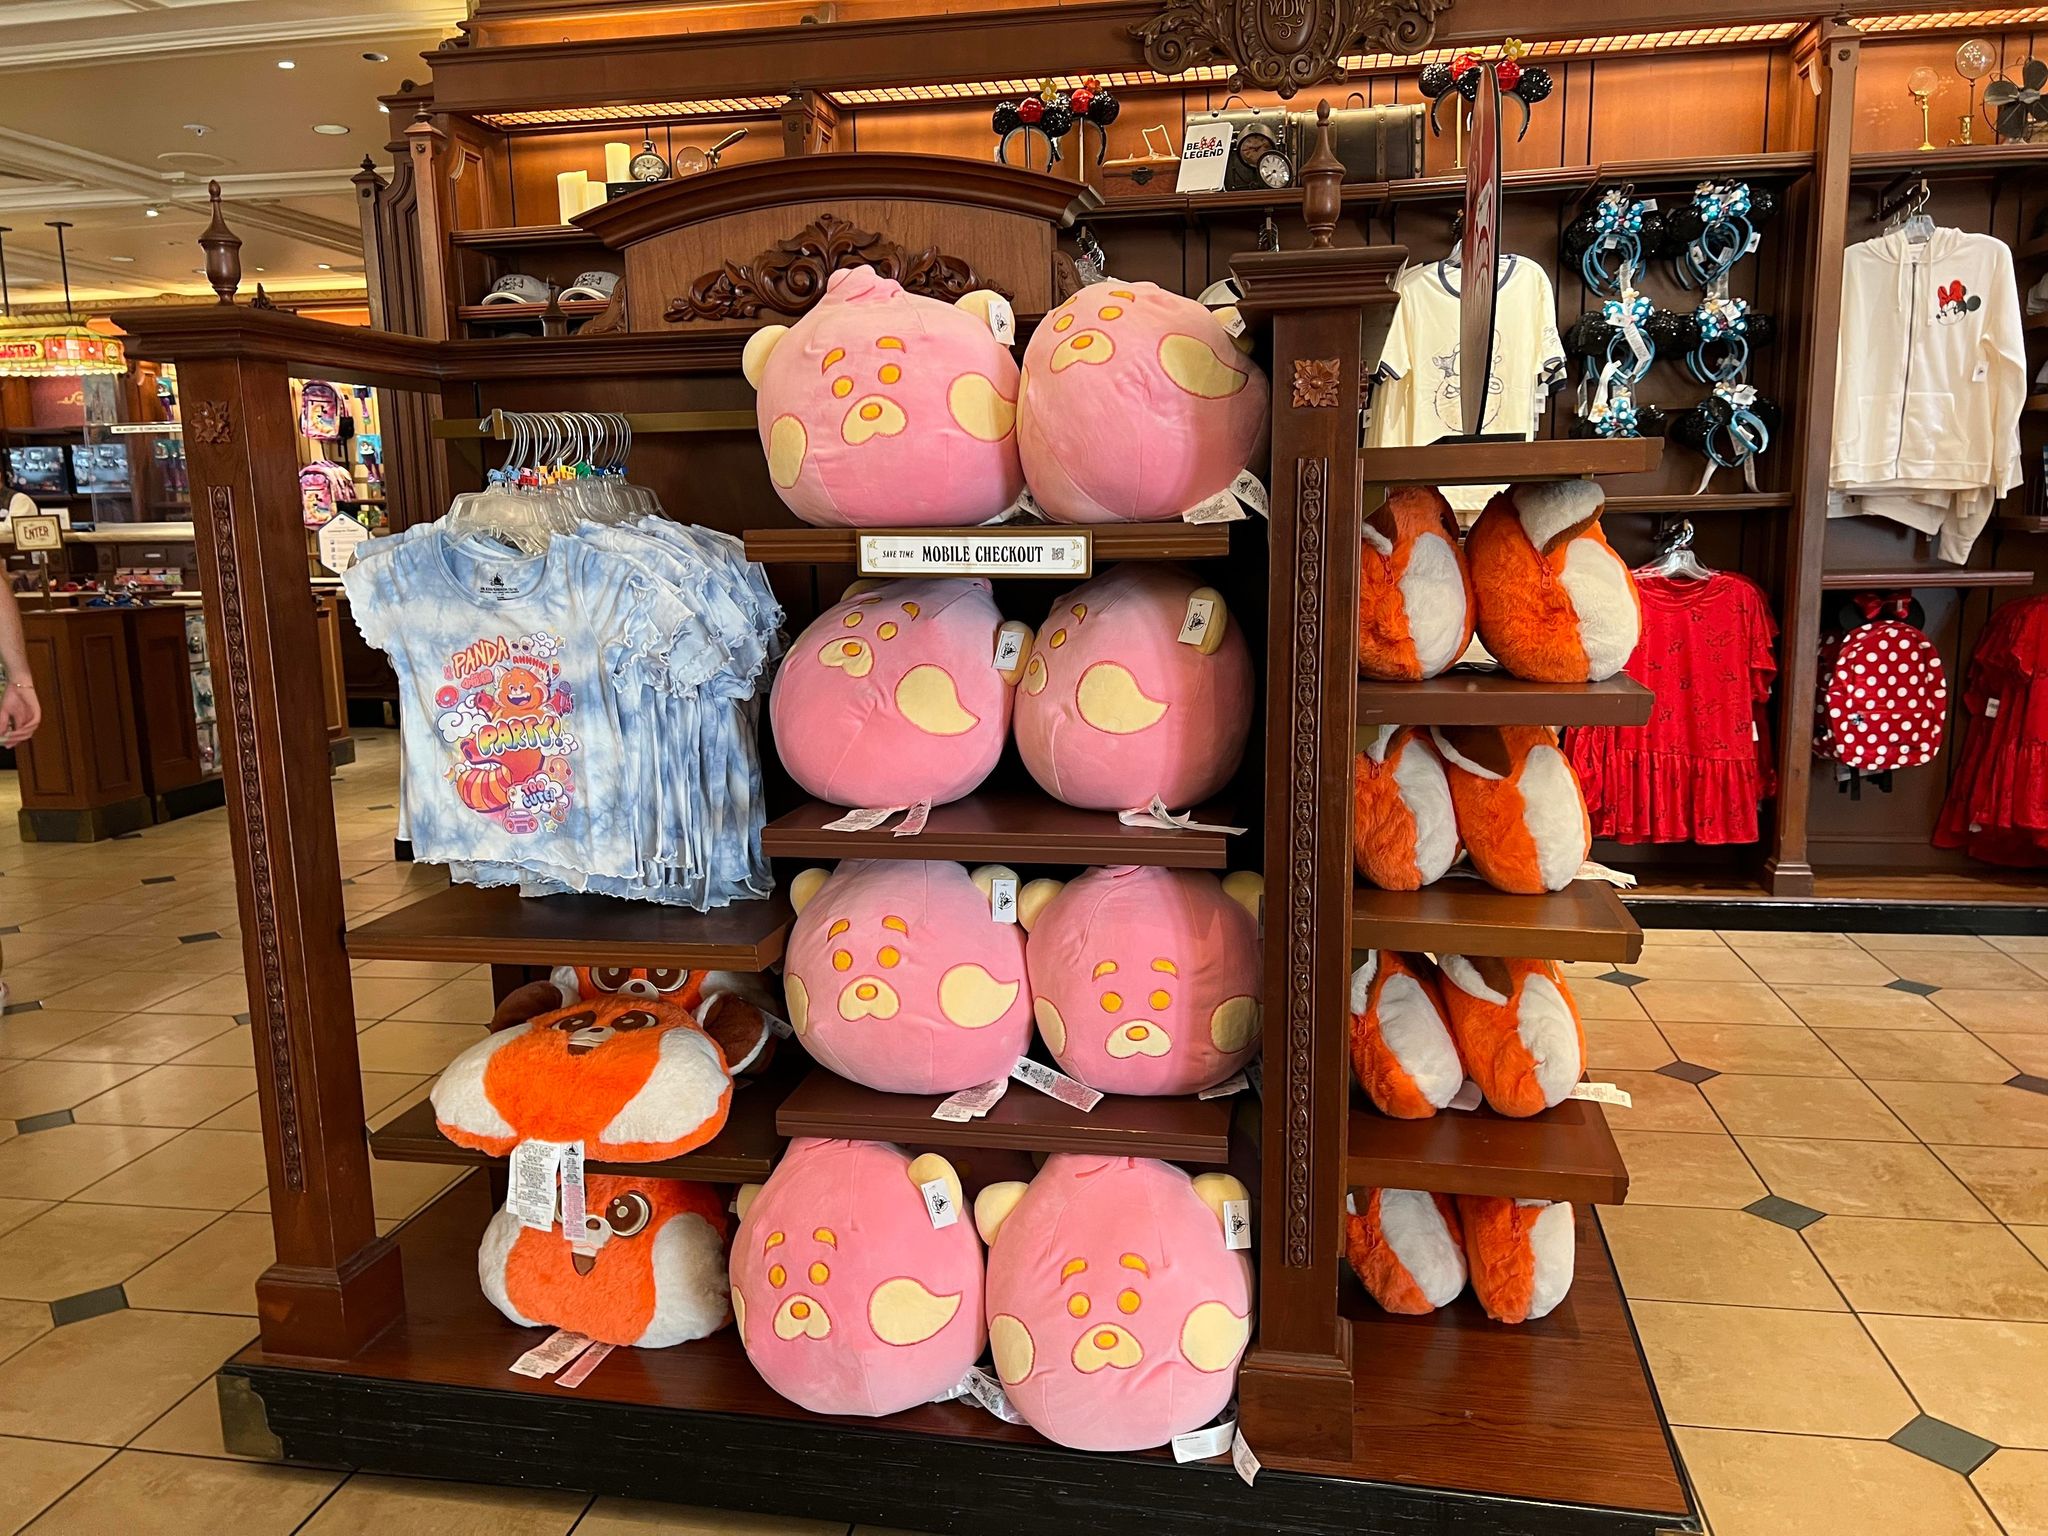 Turning Red Merch at the Emporium in Magic Kingdom - MickeyBlog.com